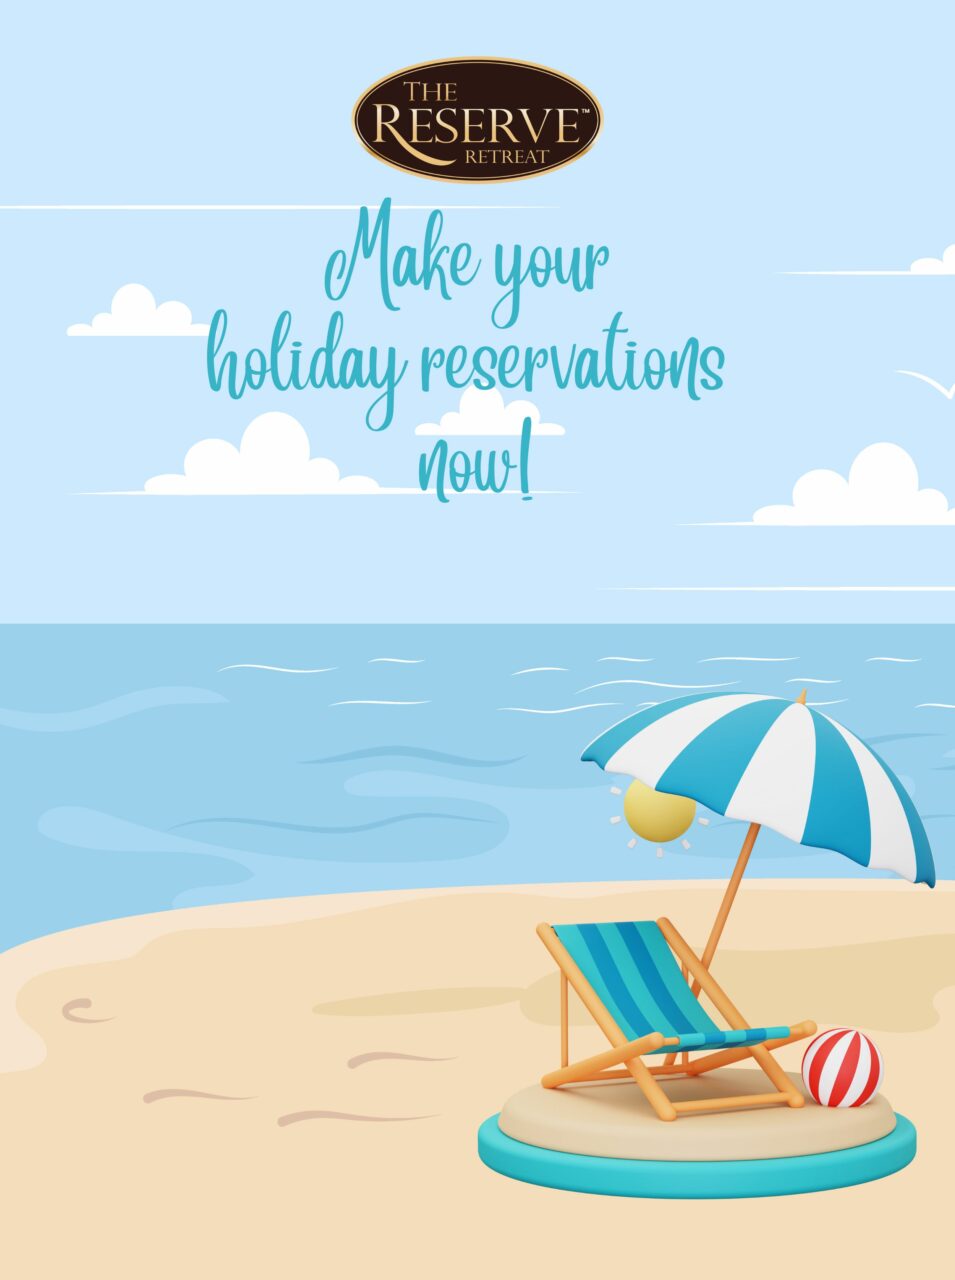 Make your holiday reservations now!